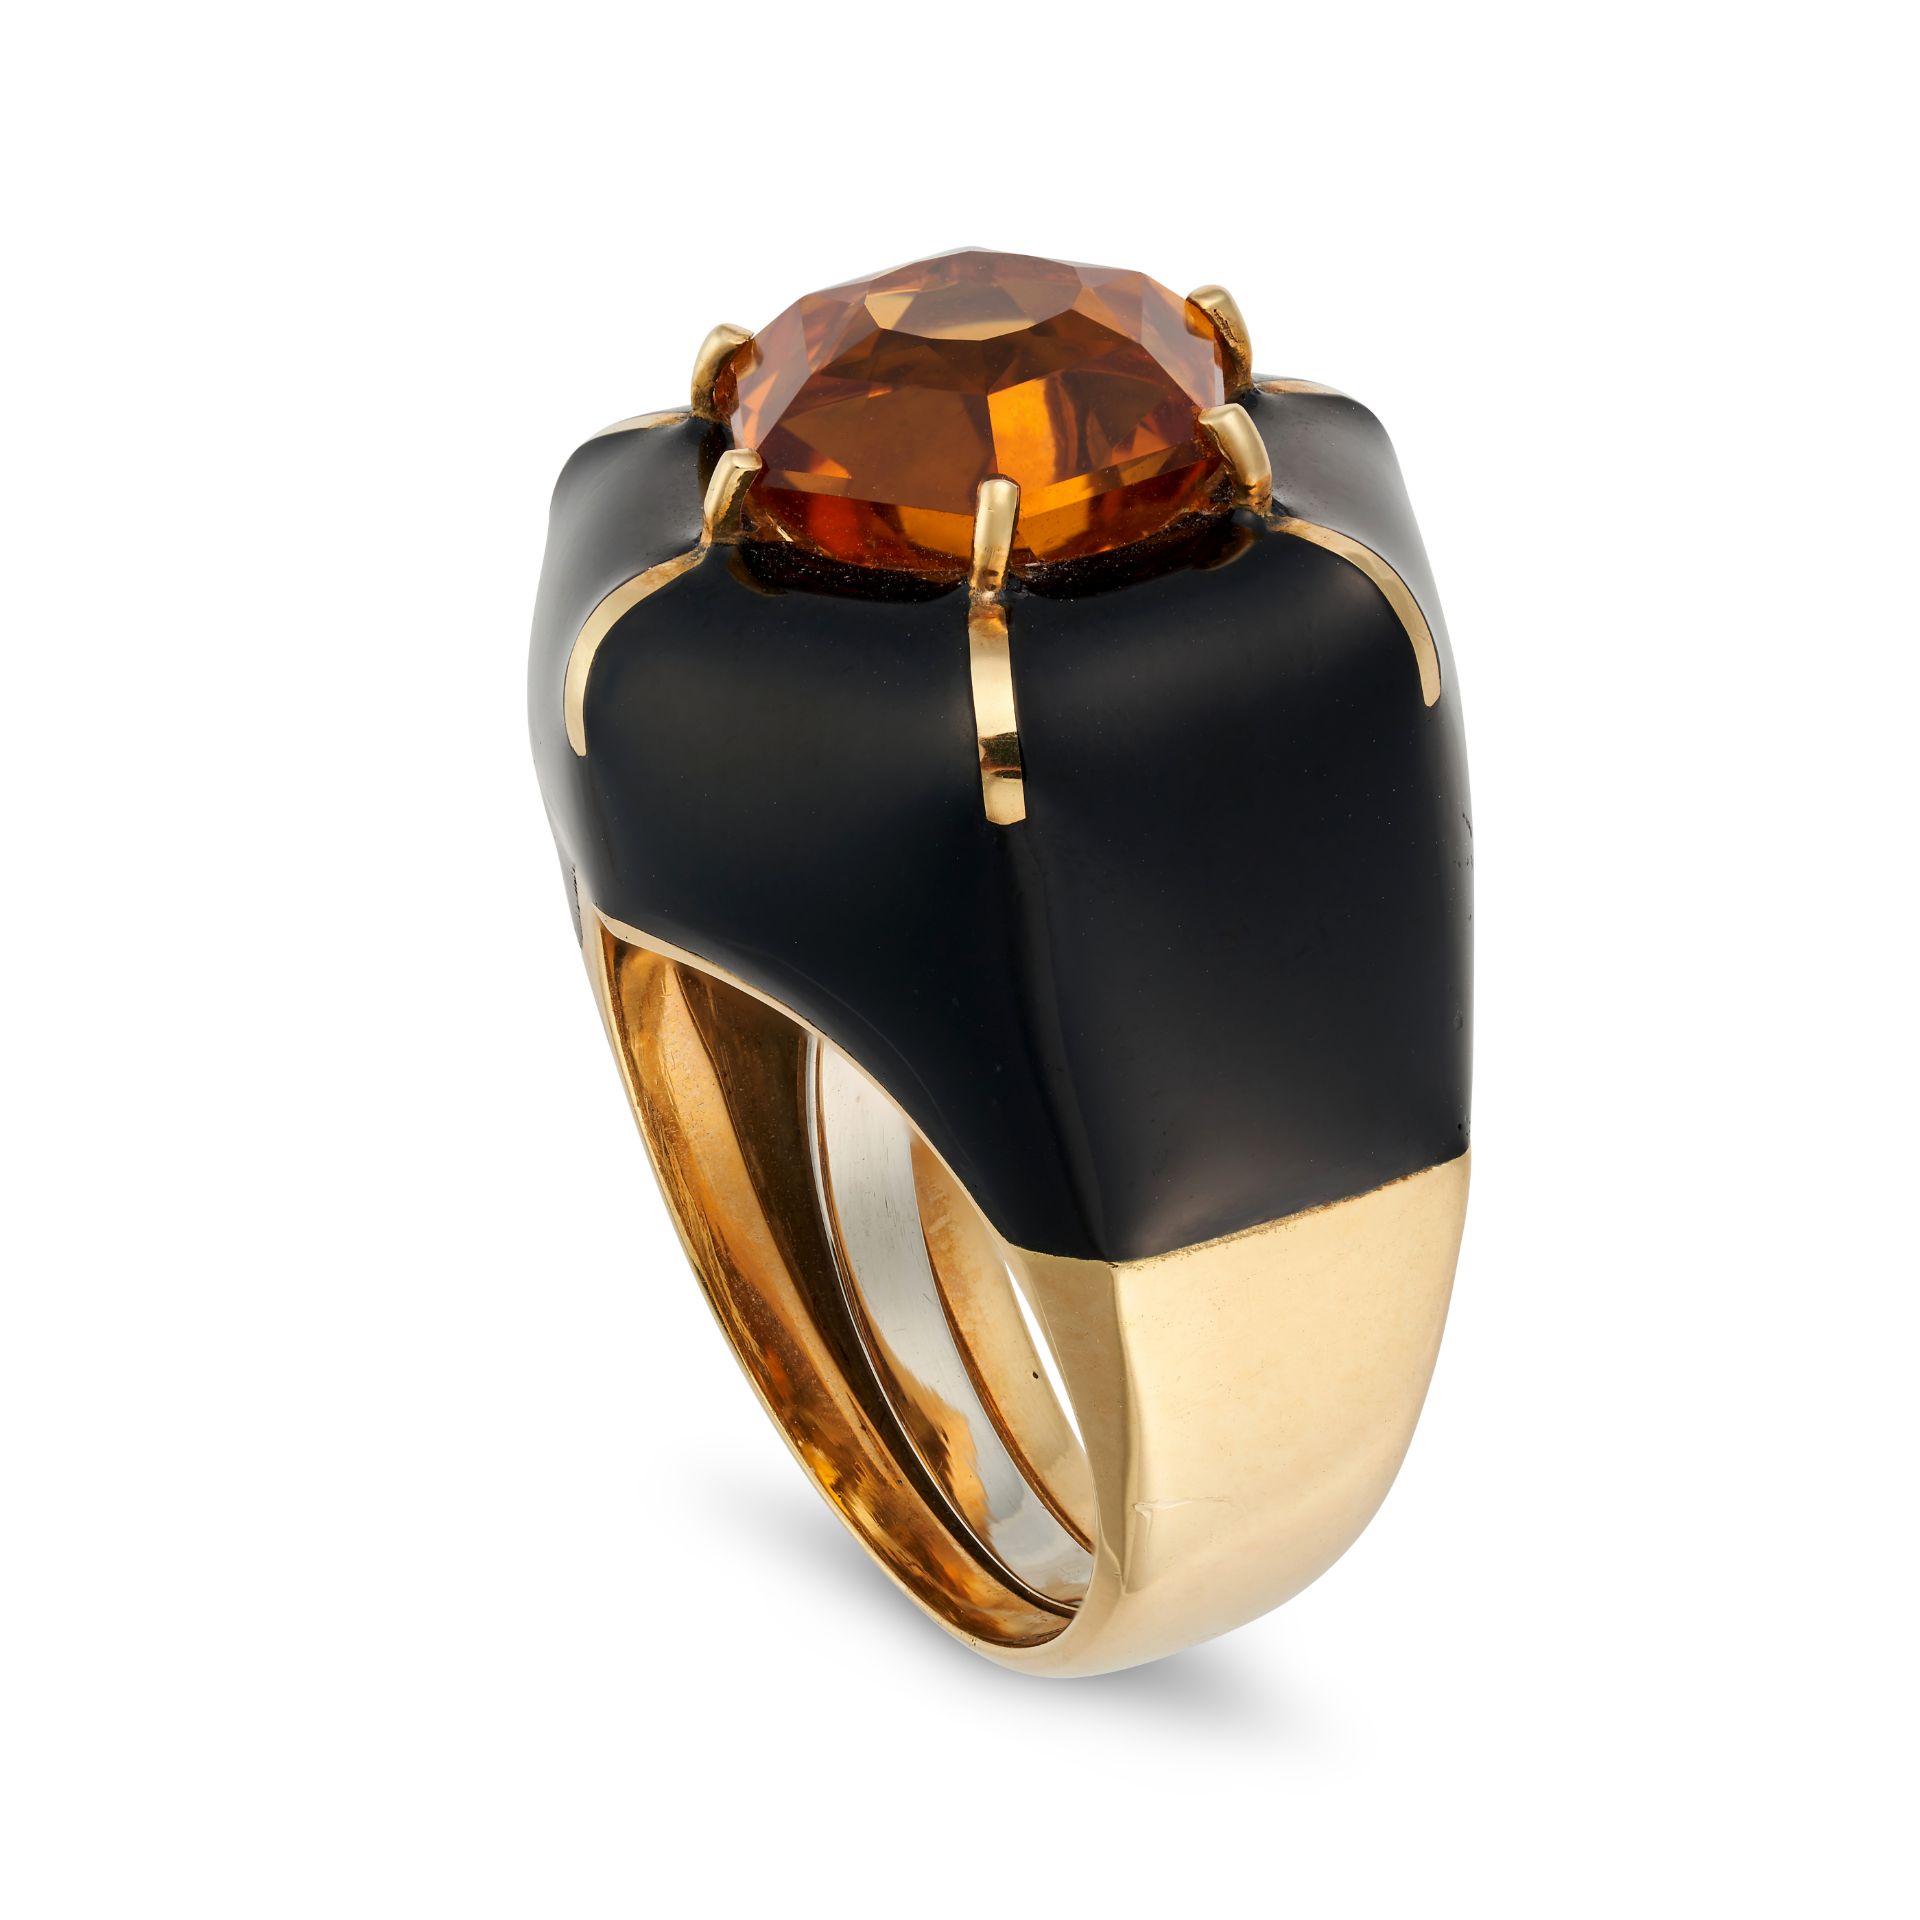 DAVID WEBB, A CITRINE AND ENAMEL RING set with a hexagonal cut citrine, the mount relieved in bla... - Image 2 of 2